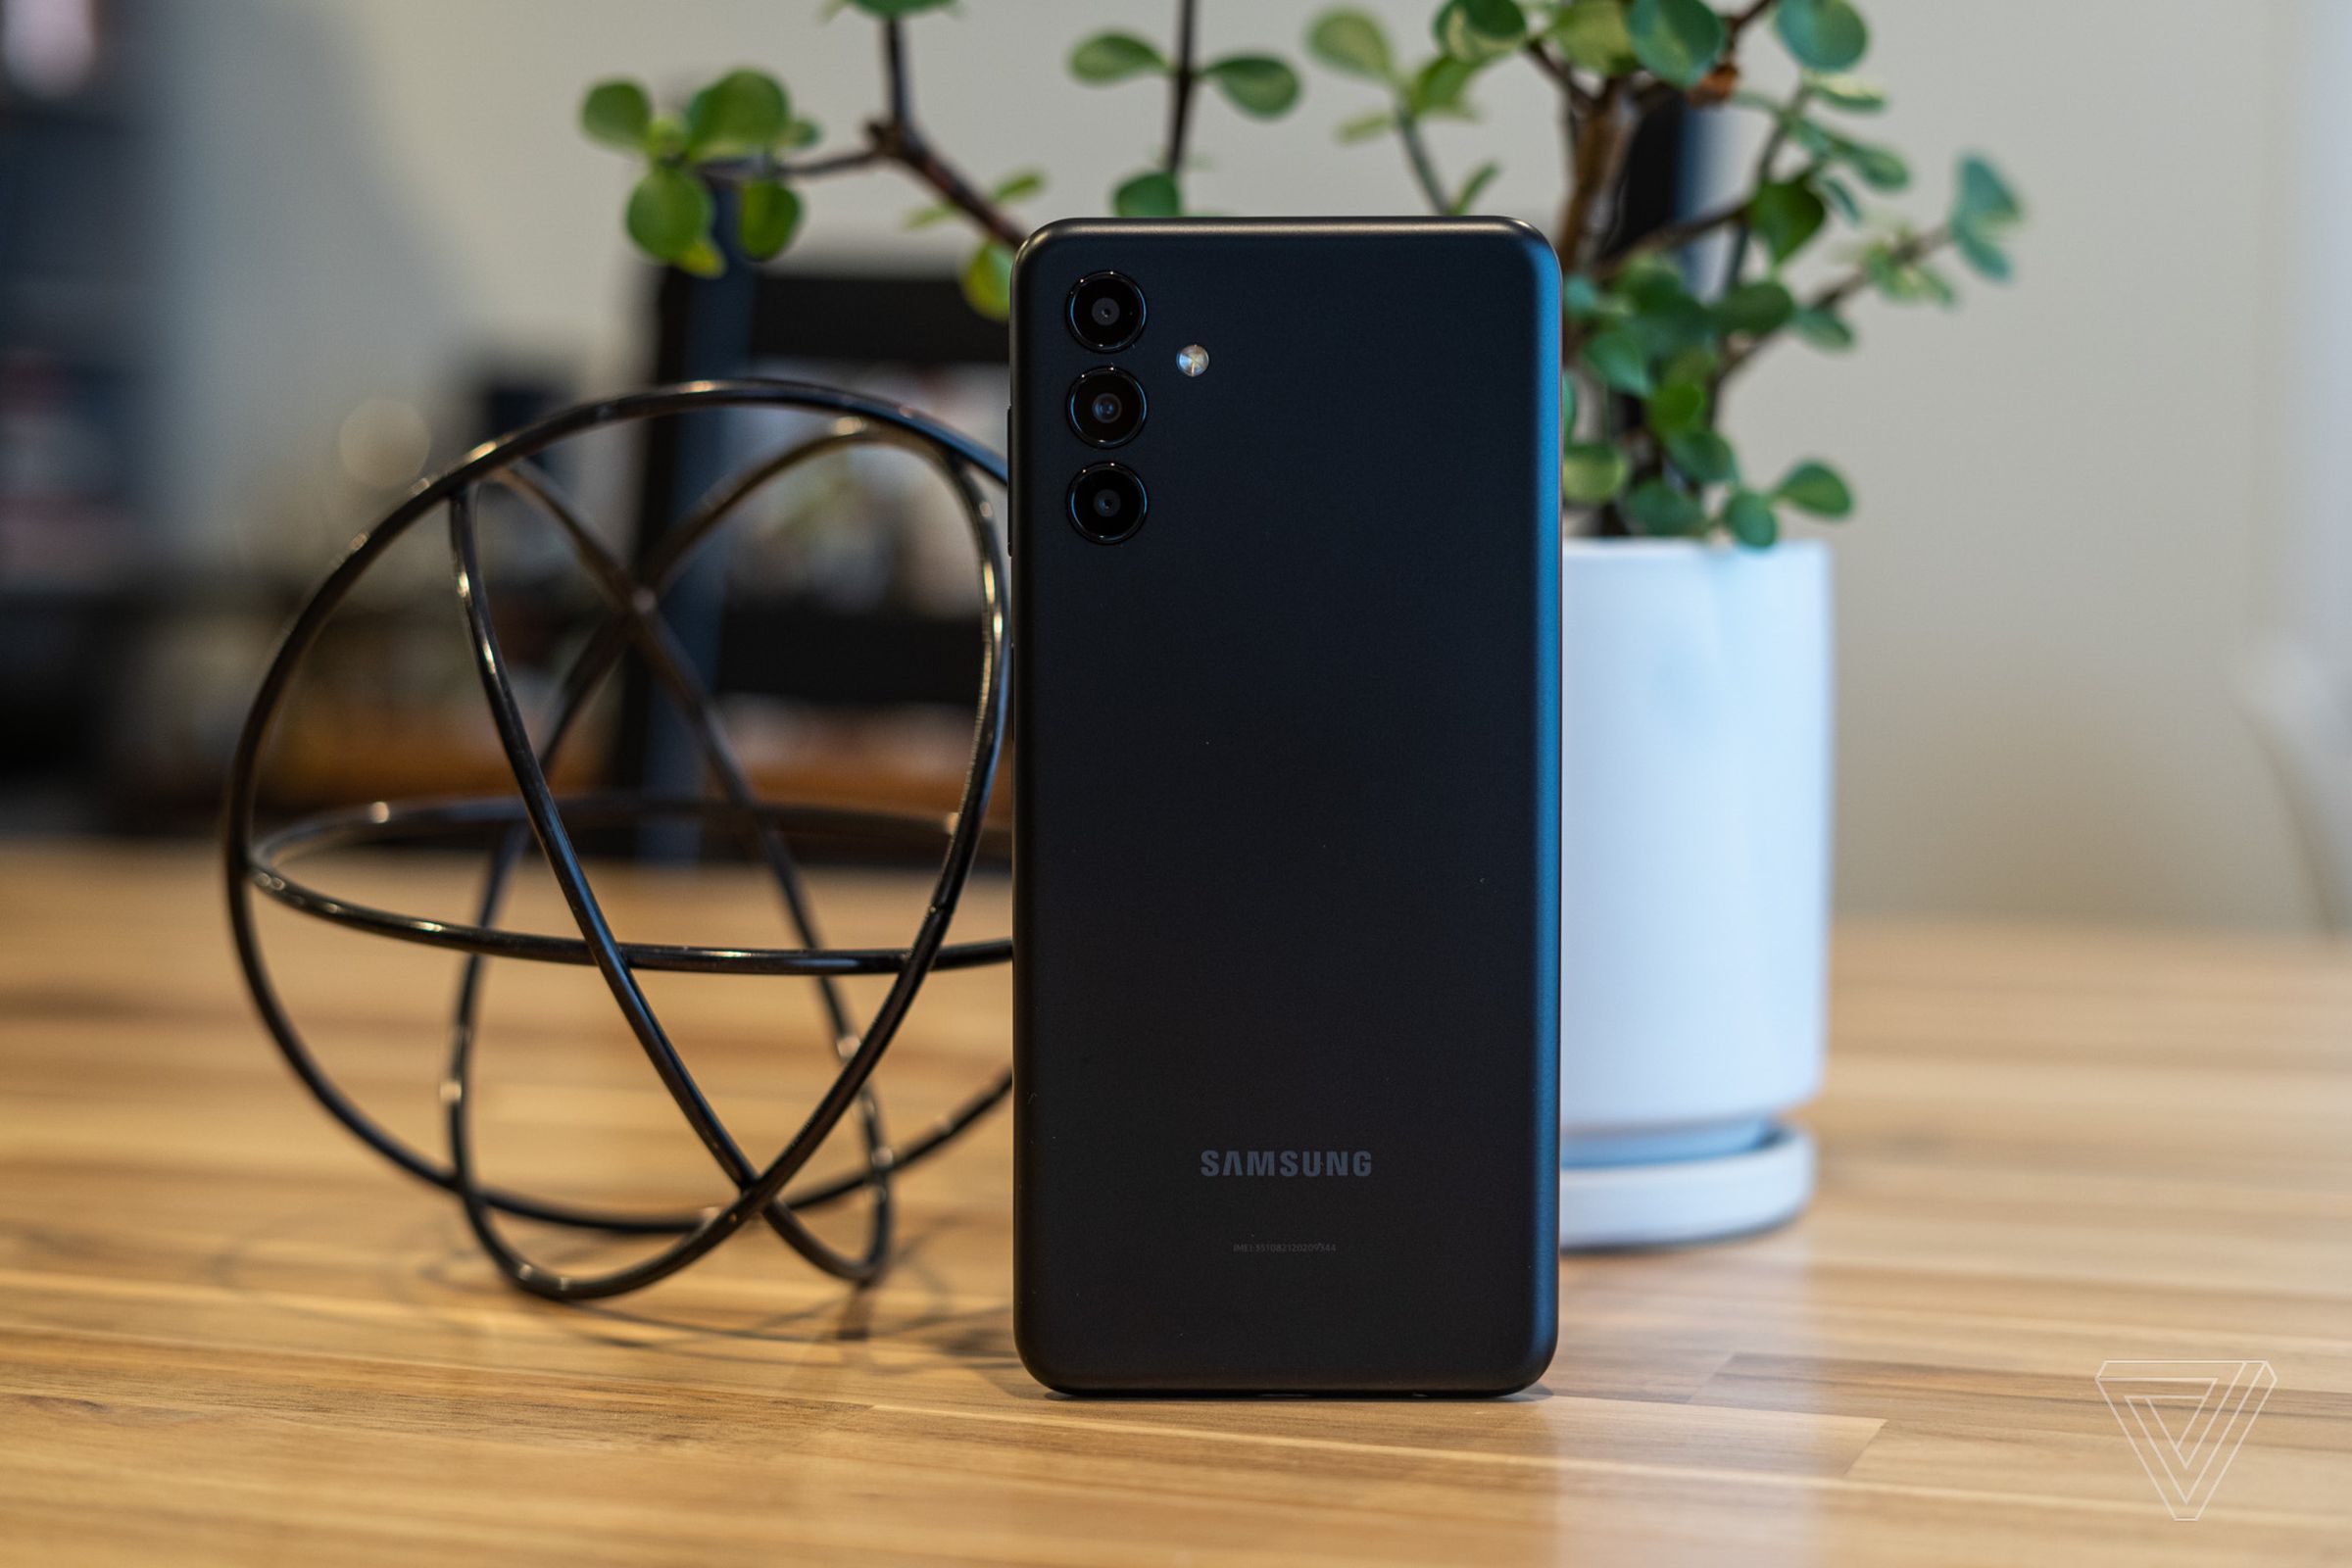 Rear shot of the Samsung A13 5G standing upright on a wooden tabletop in front of a potted jade plant and a black metal wire sphere thing.